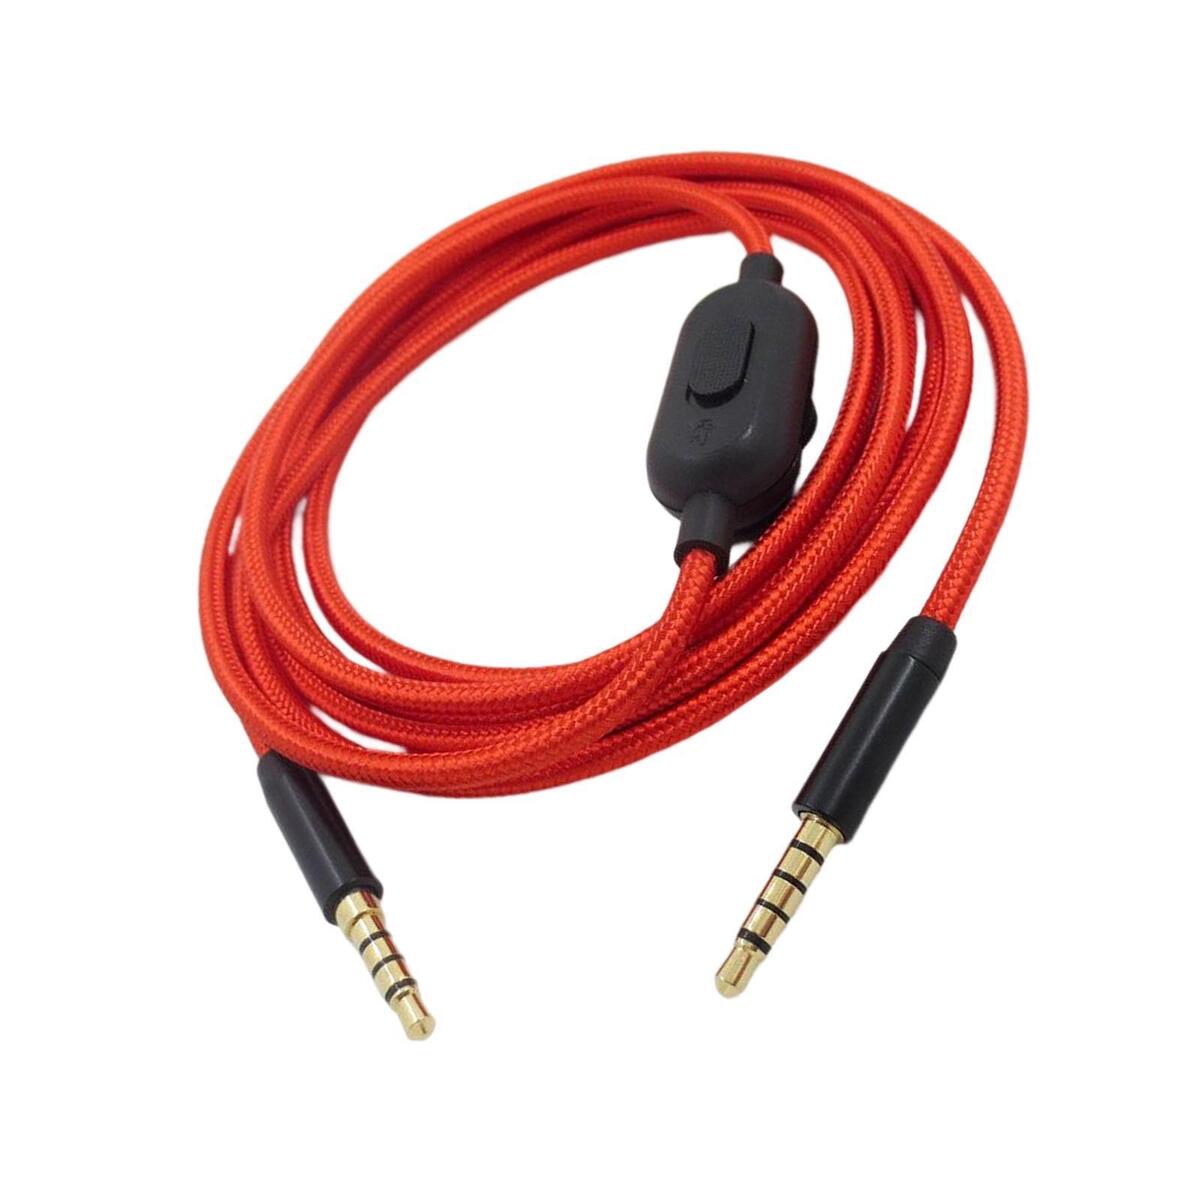 How To Use Male To Male Stereo Audio Cable With 3D’s